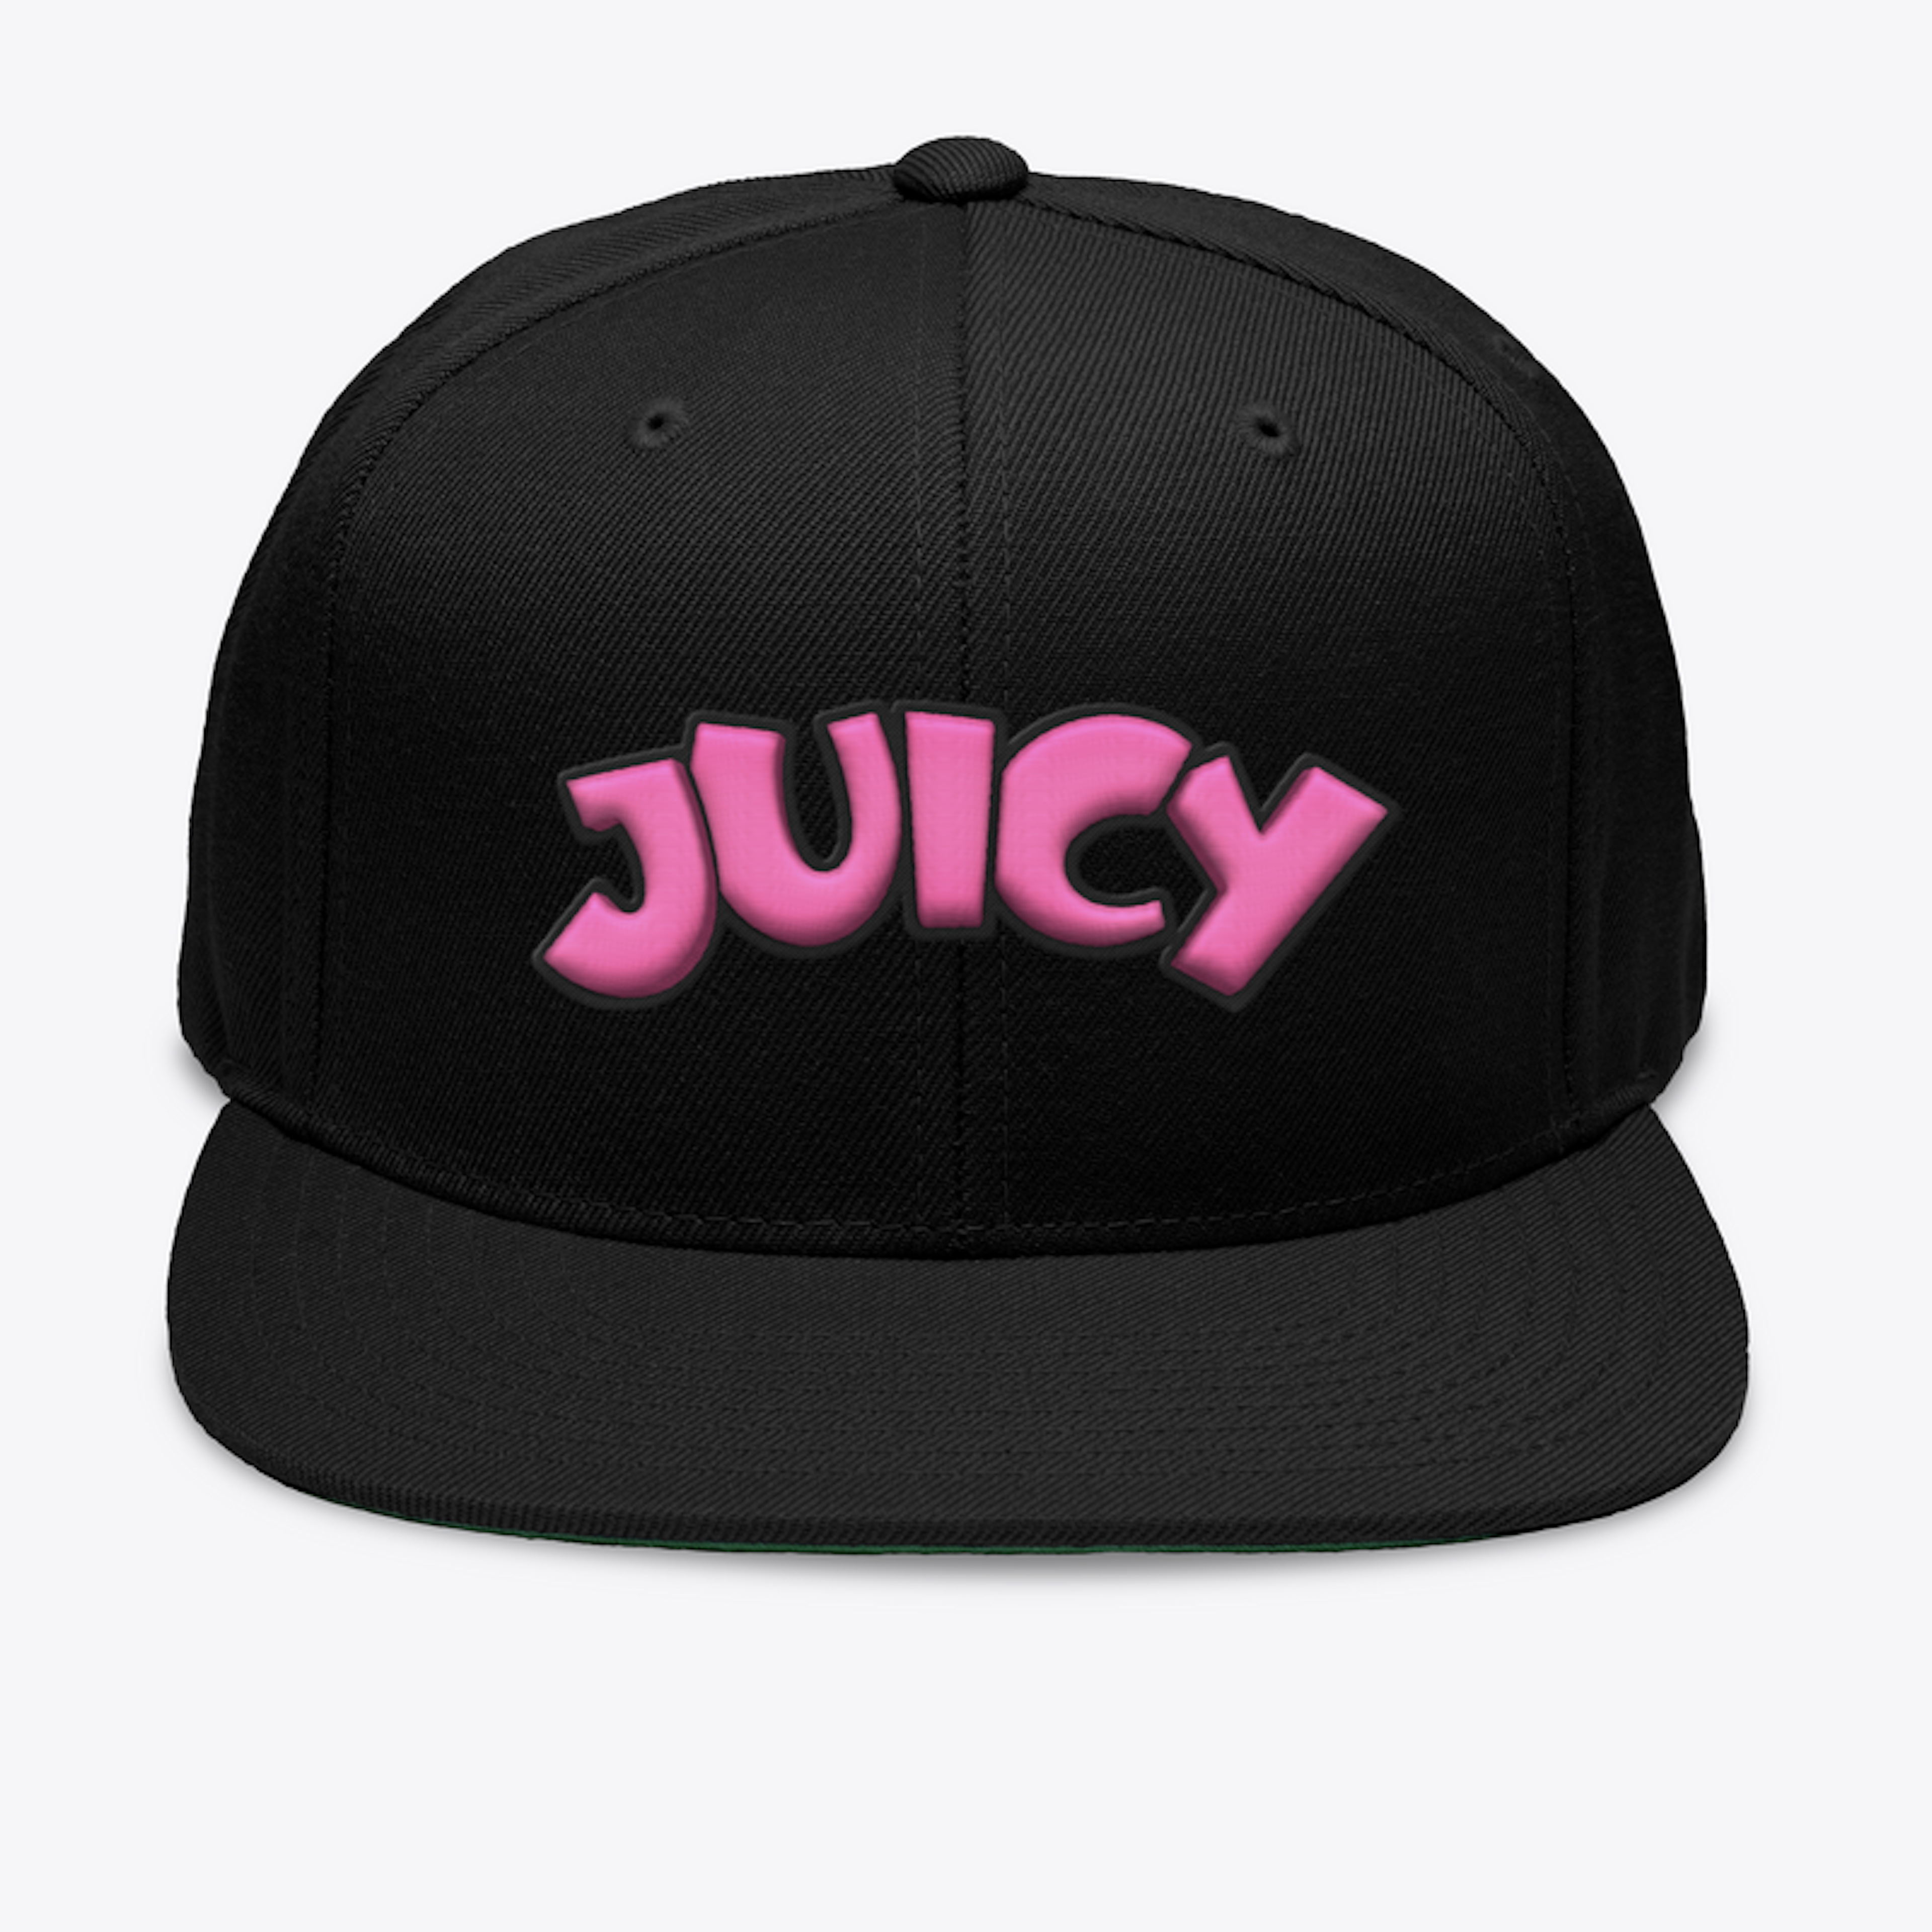   Juicy Snapback - PUFF embroidered